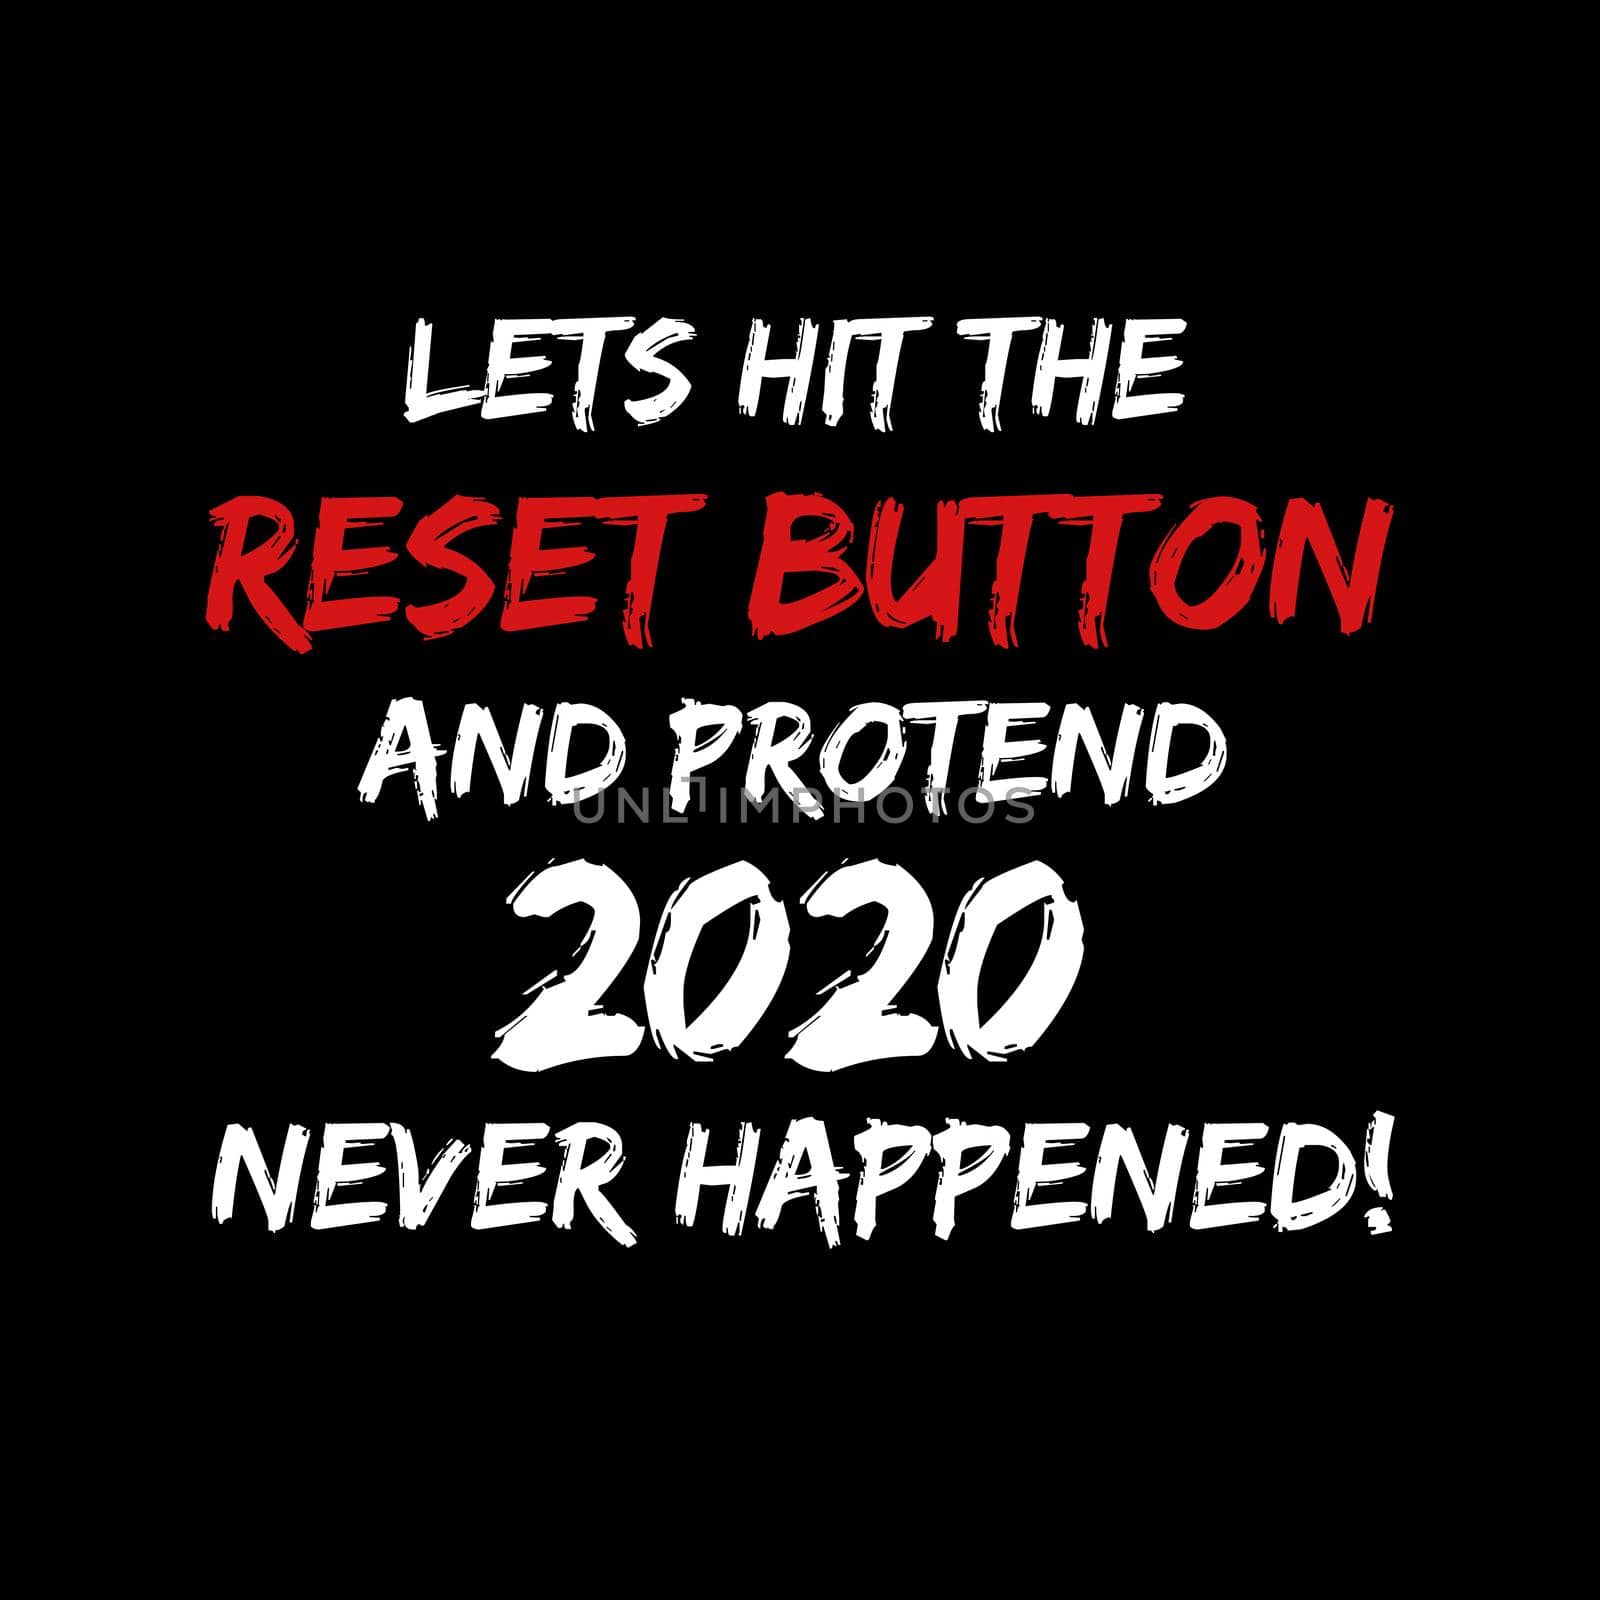 Lets hit the 2020 reset button